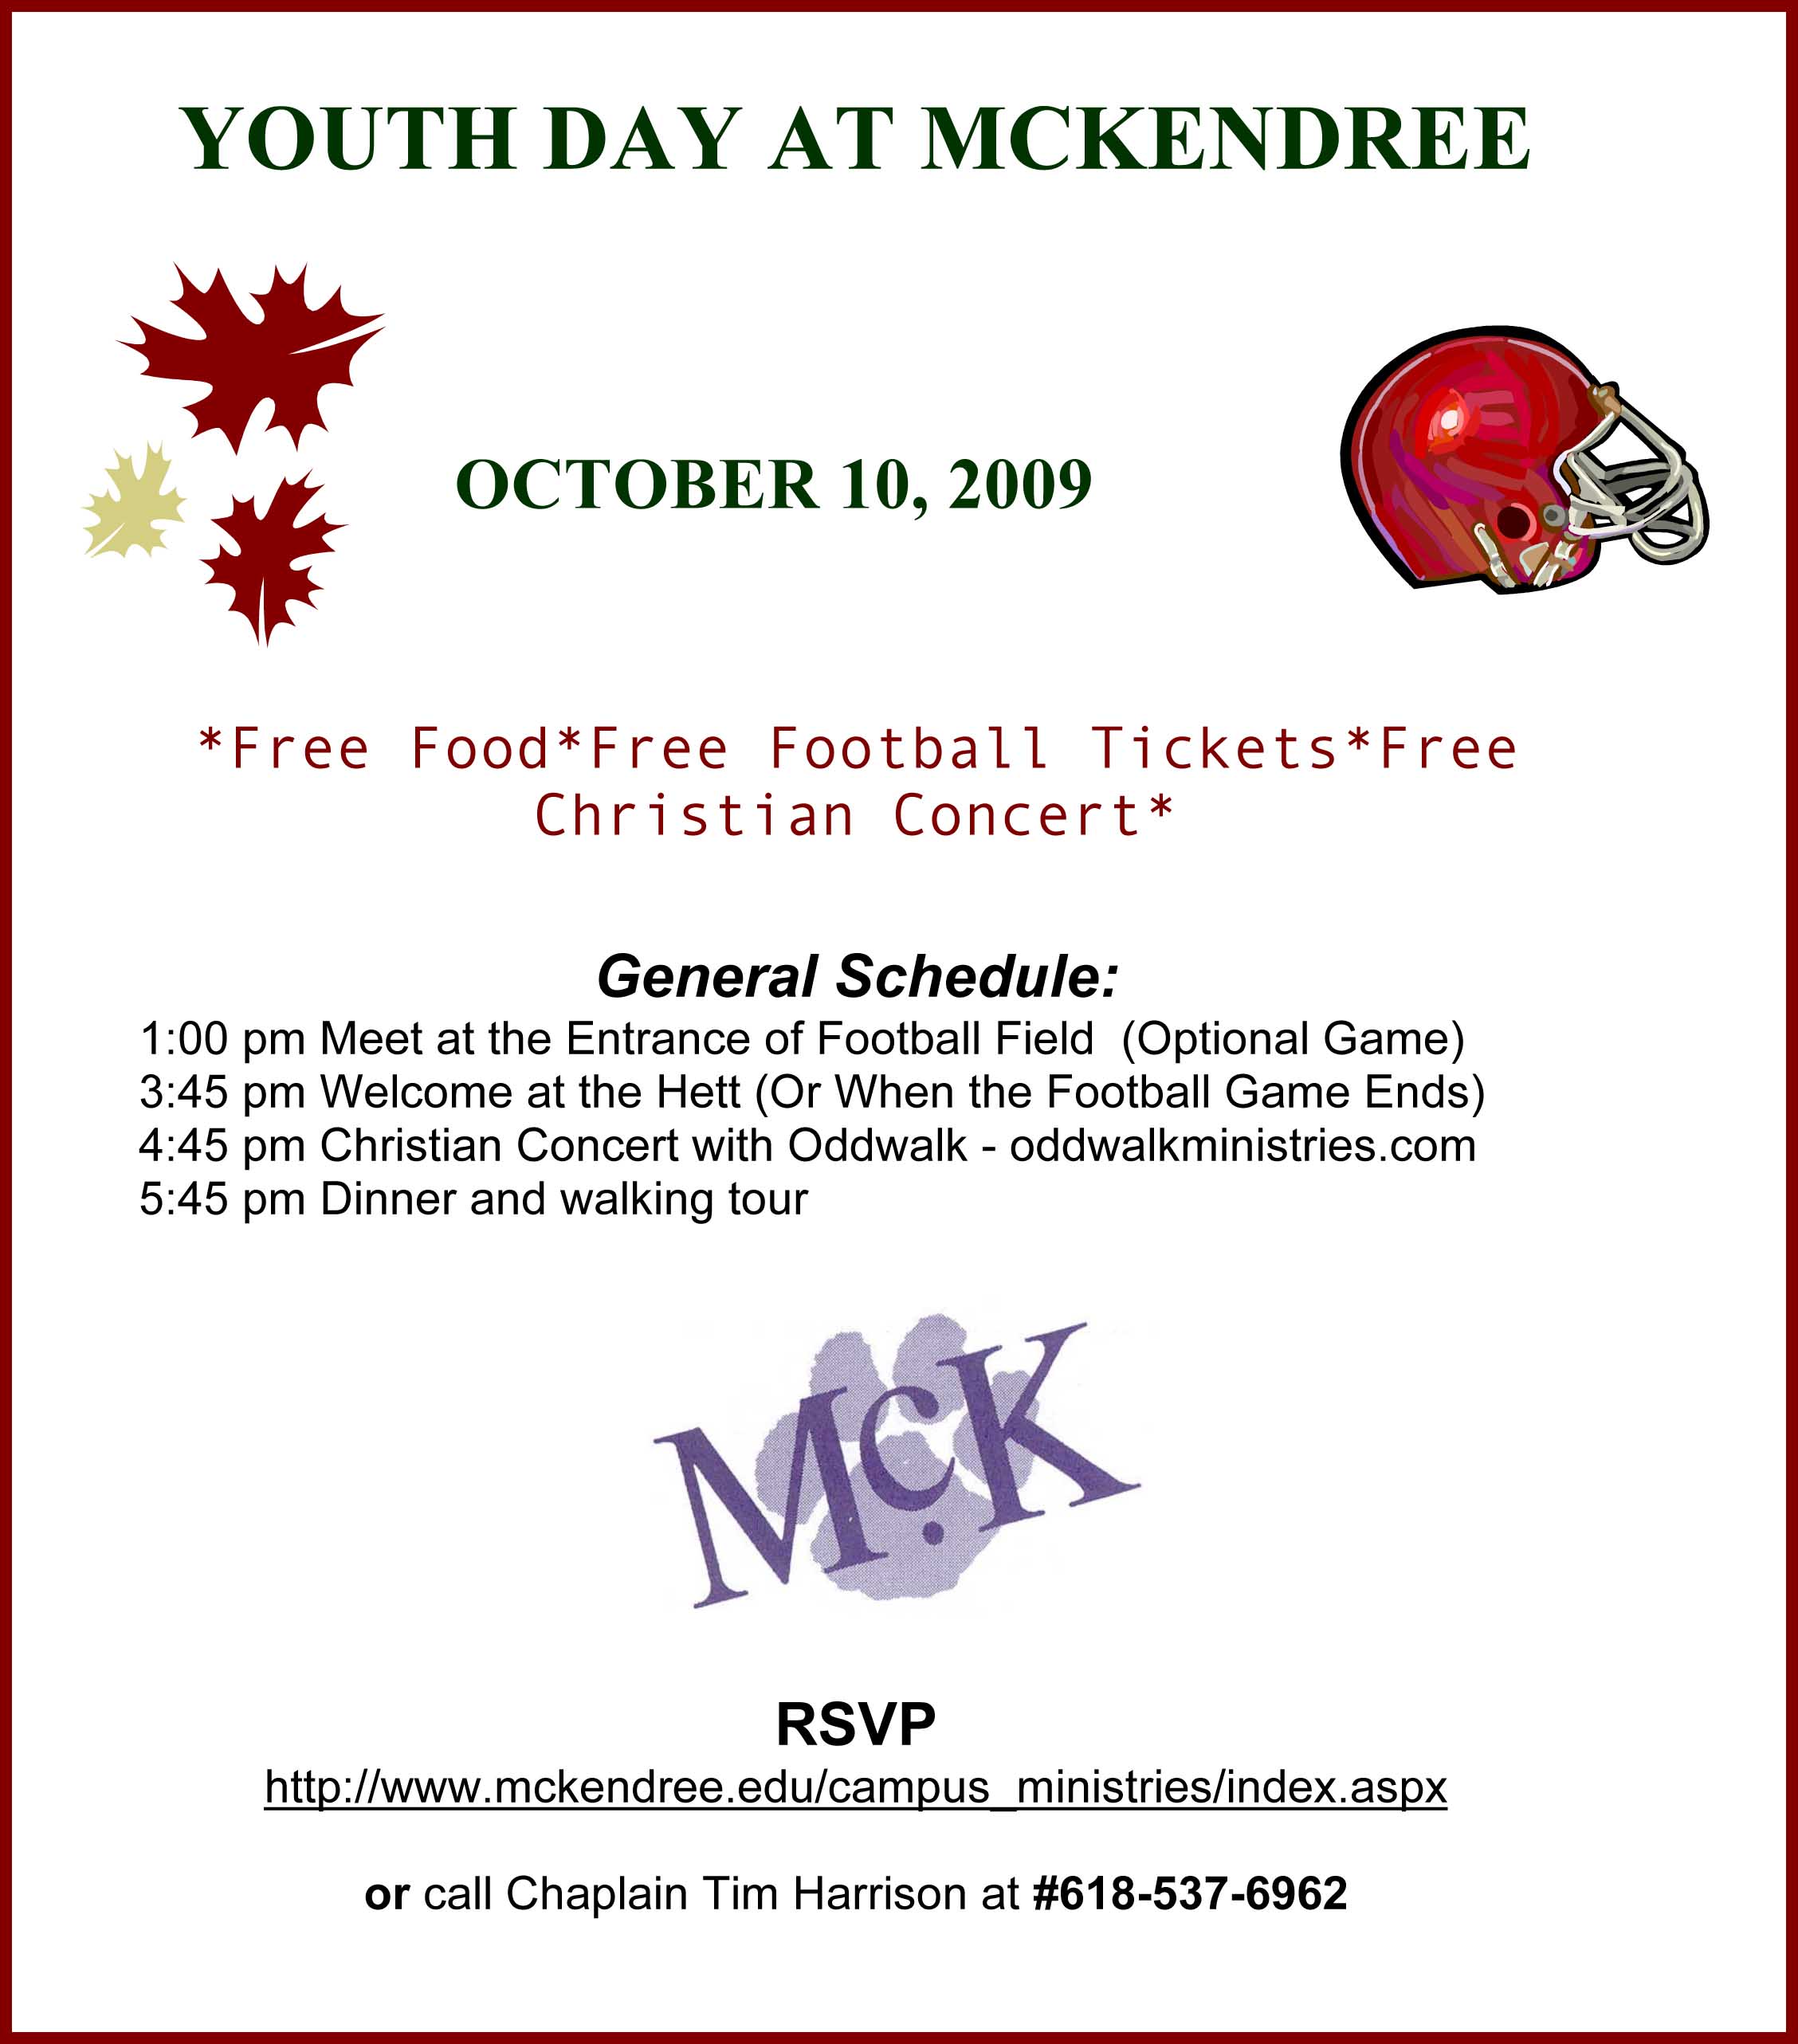 YOUTH DAY AT MCKENDREE Fly..